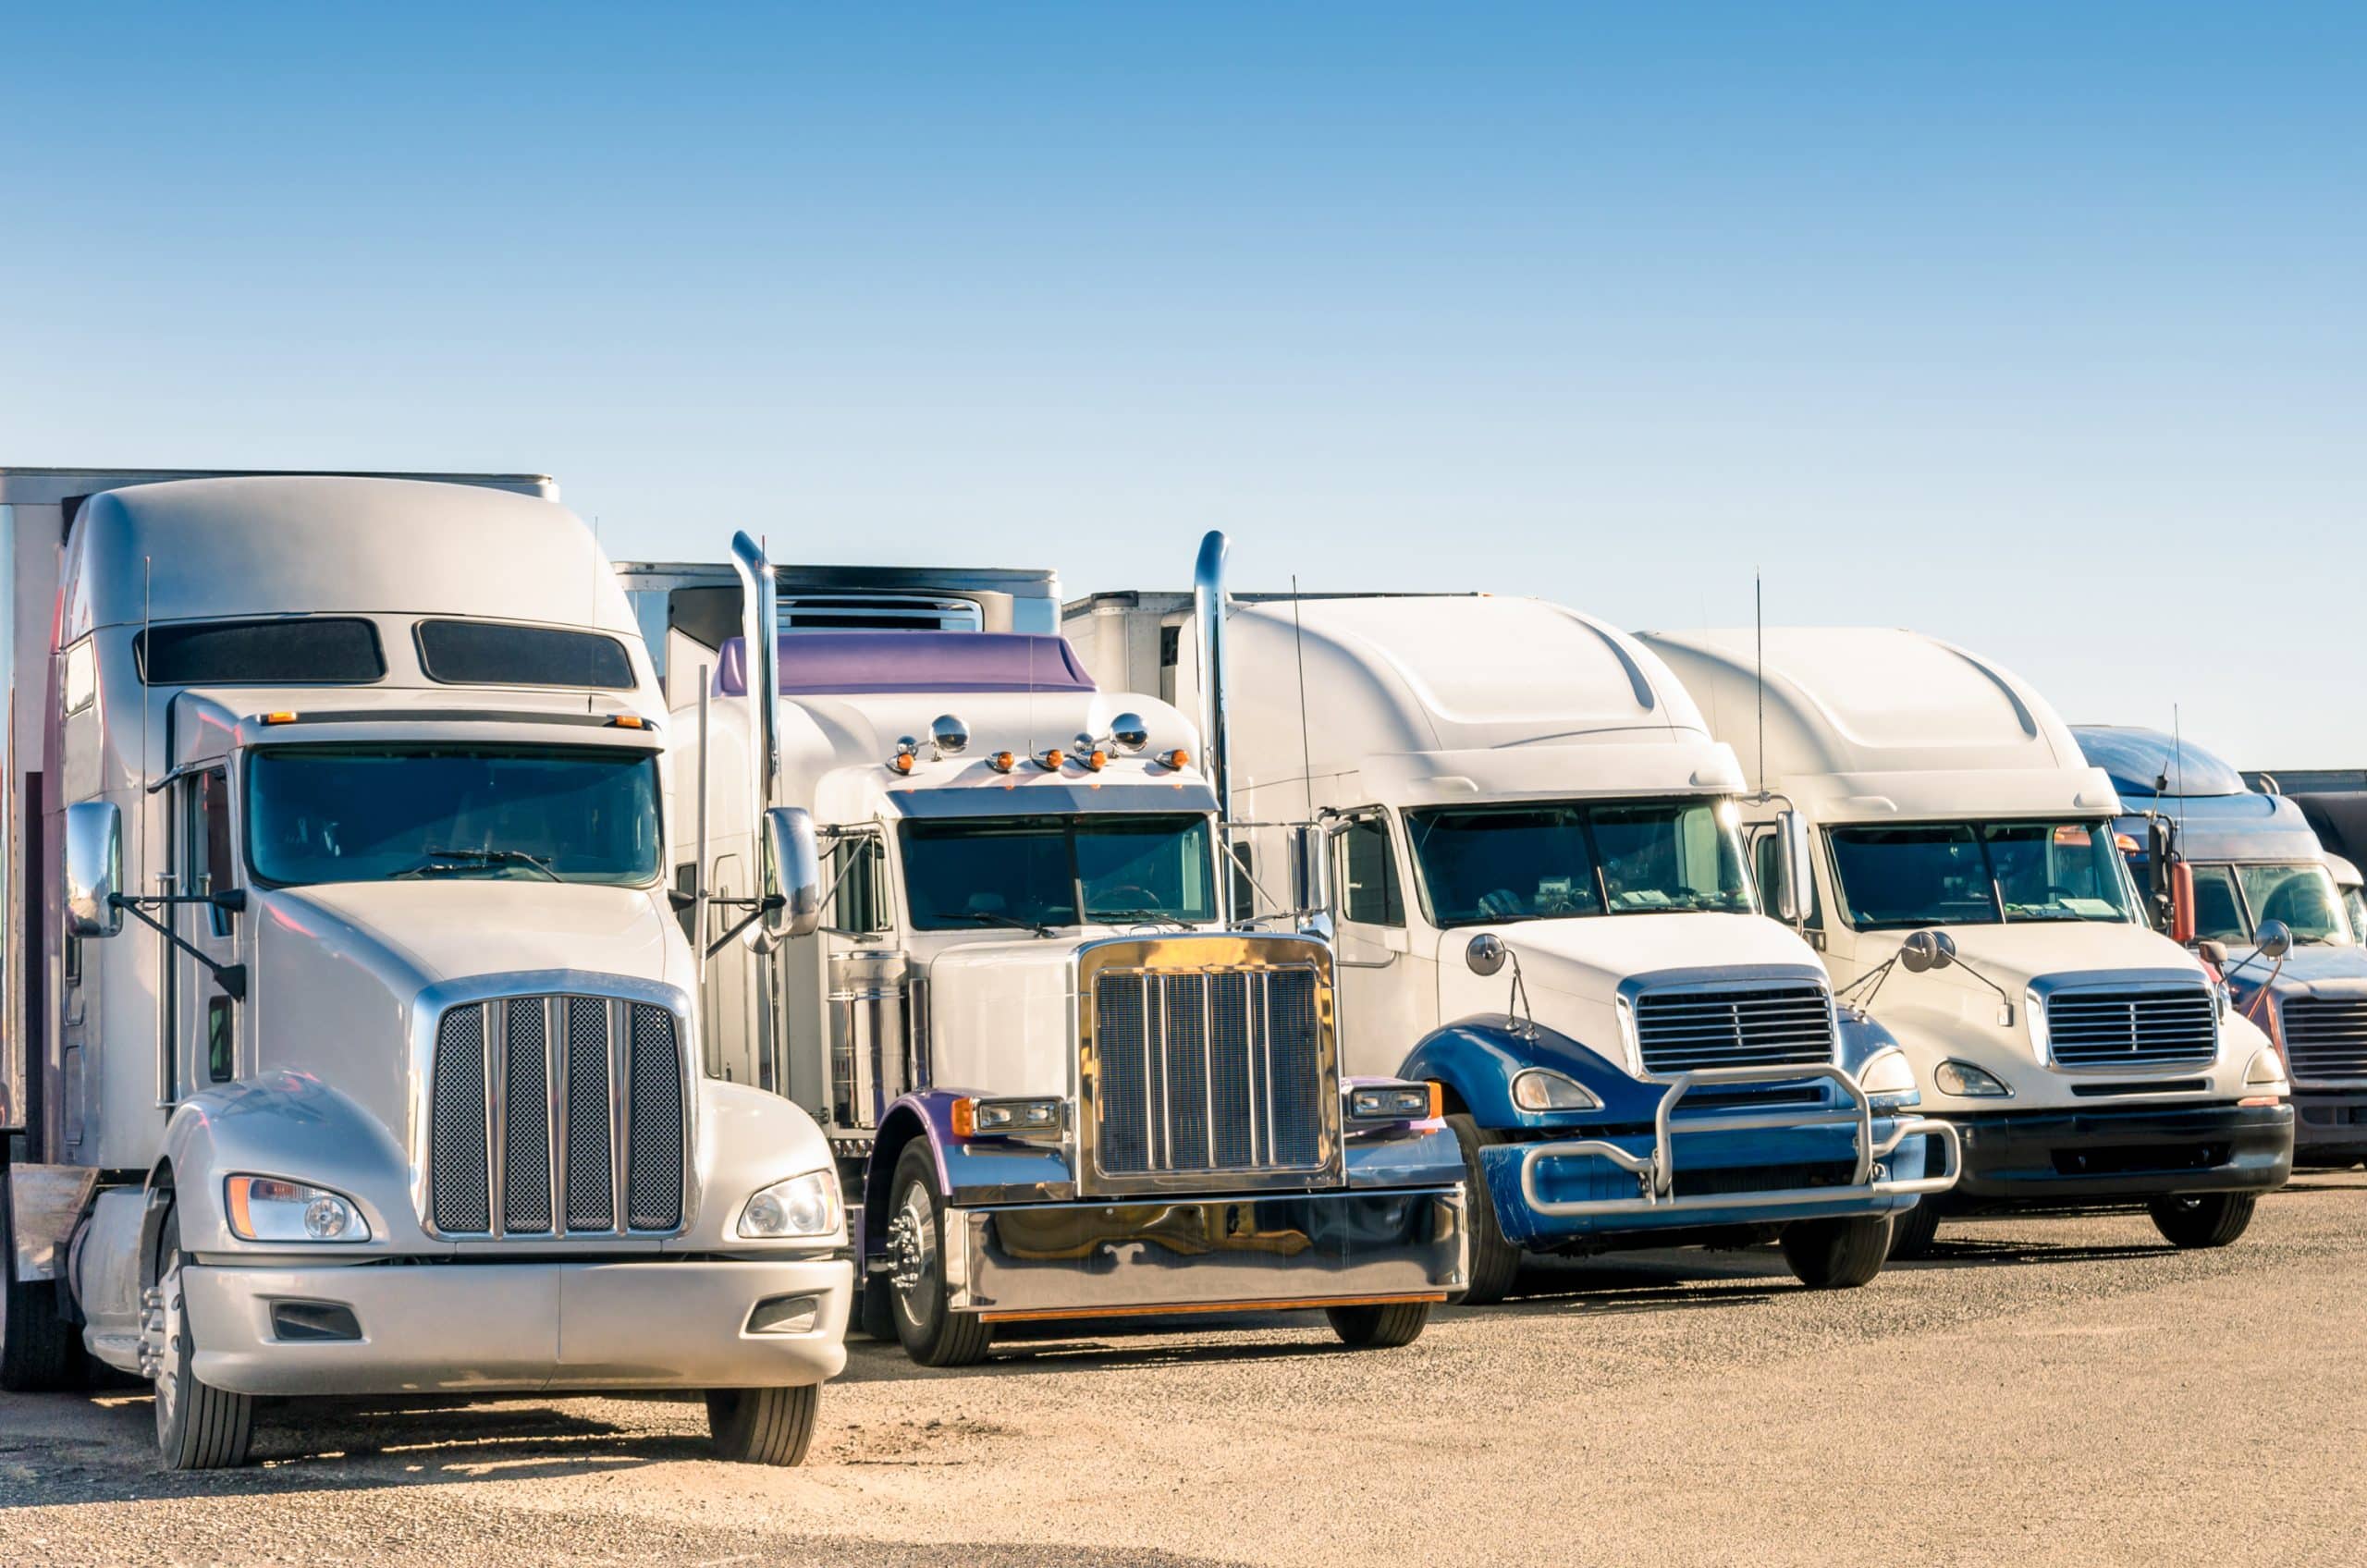 Cost comparison: Truck fleet washing vs. commercial retail truck washing